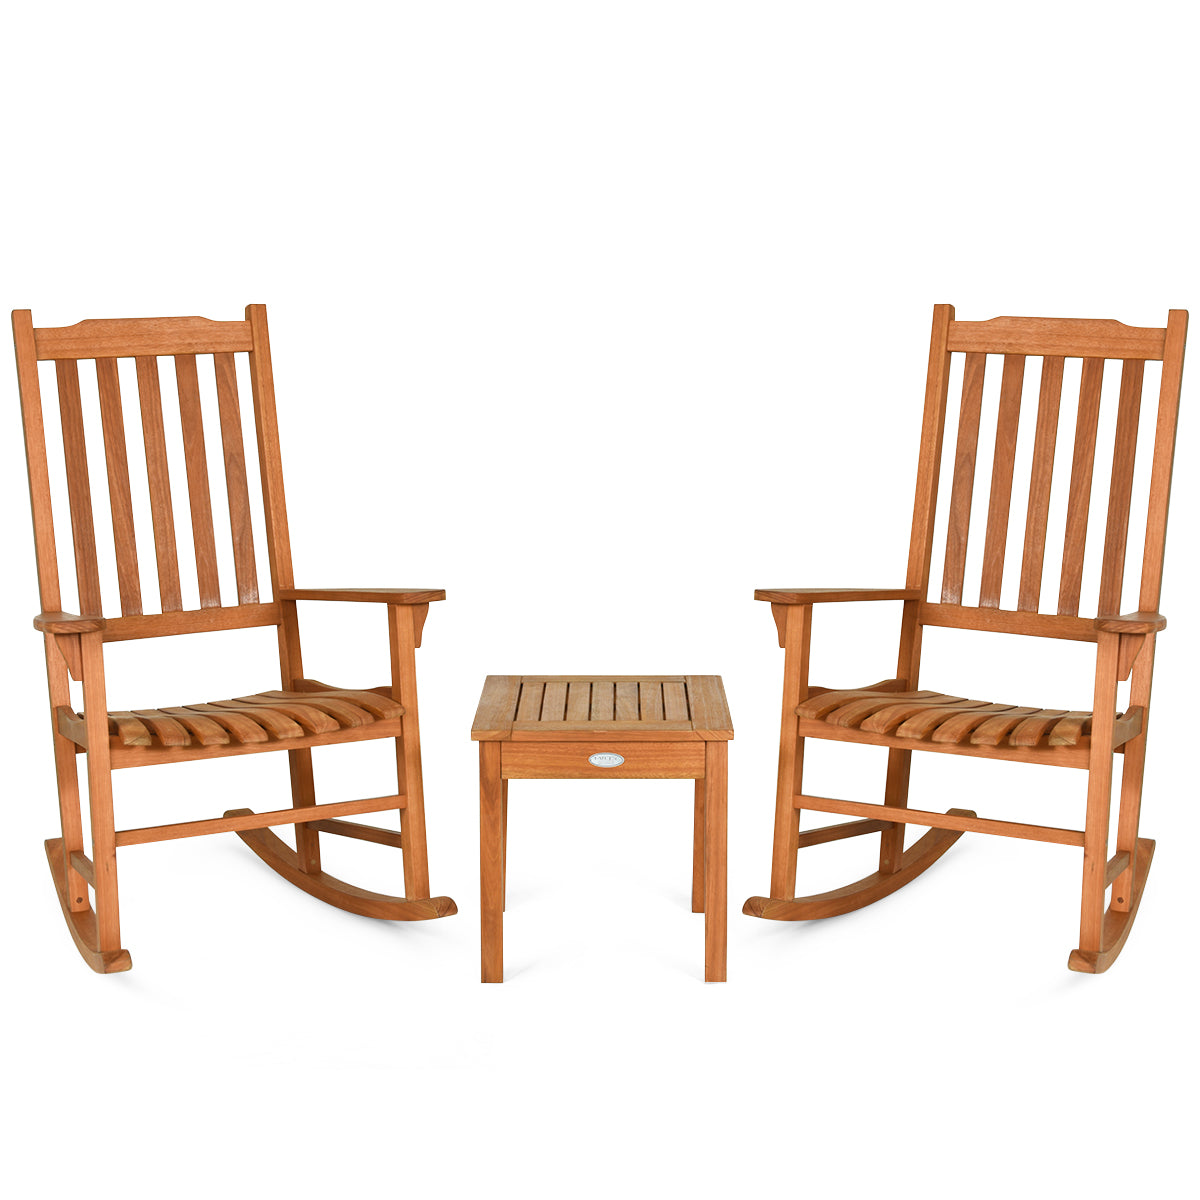 Rocking Chair 3 Piece Set Wooden W/ Two Wood Conversation Chairs and Accent Table